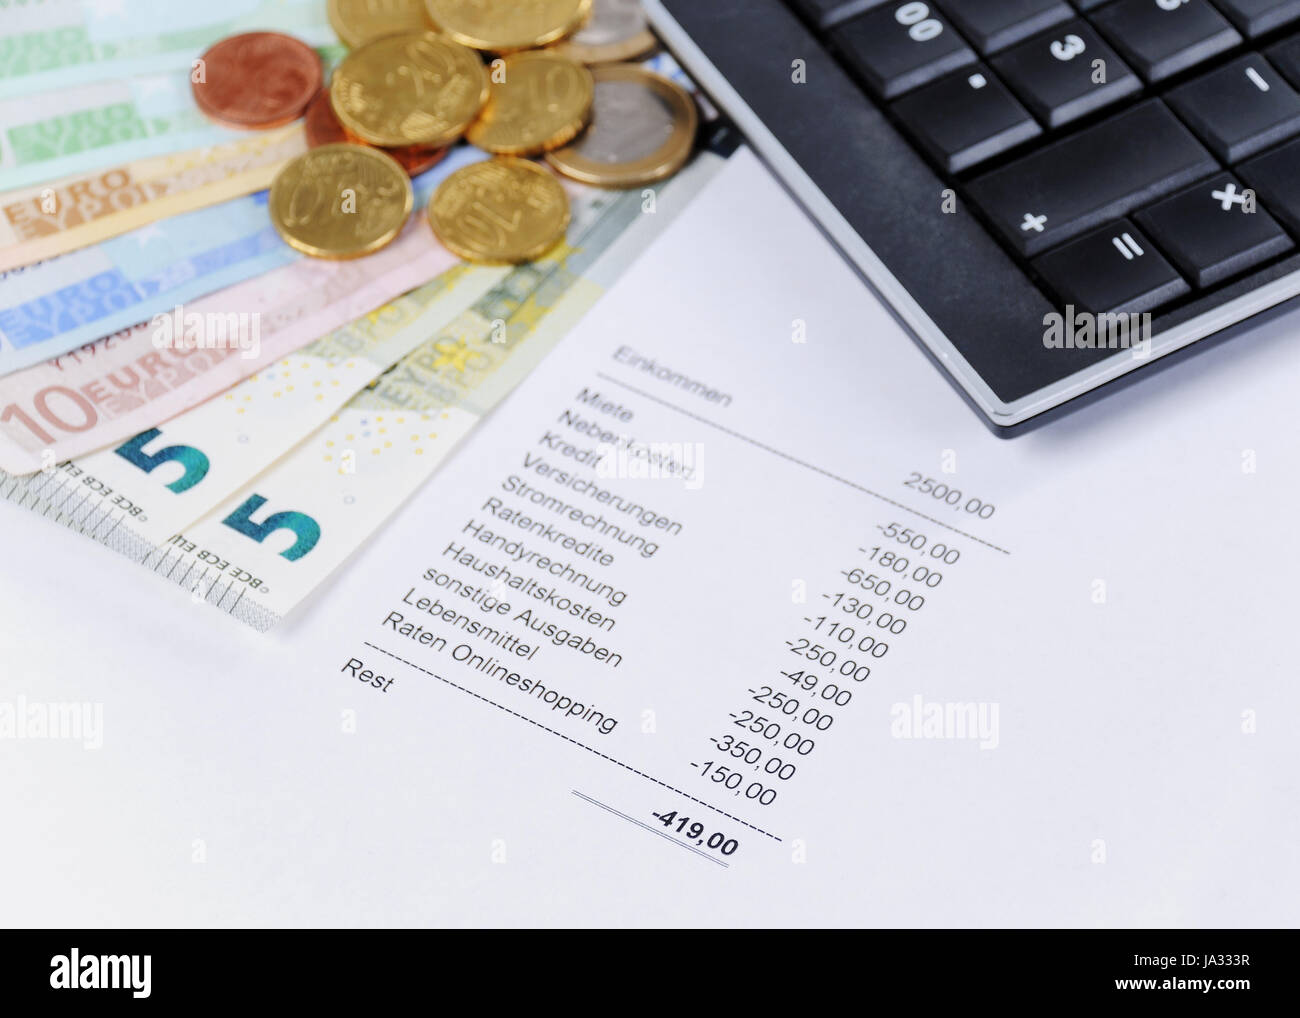 calculation, euro, currency, bank note, pocket calculator, invoice, Stock Photo